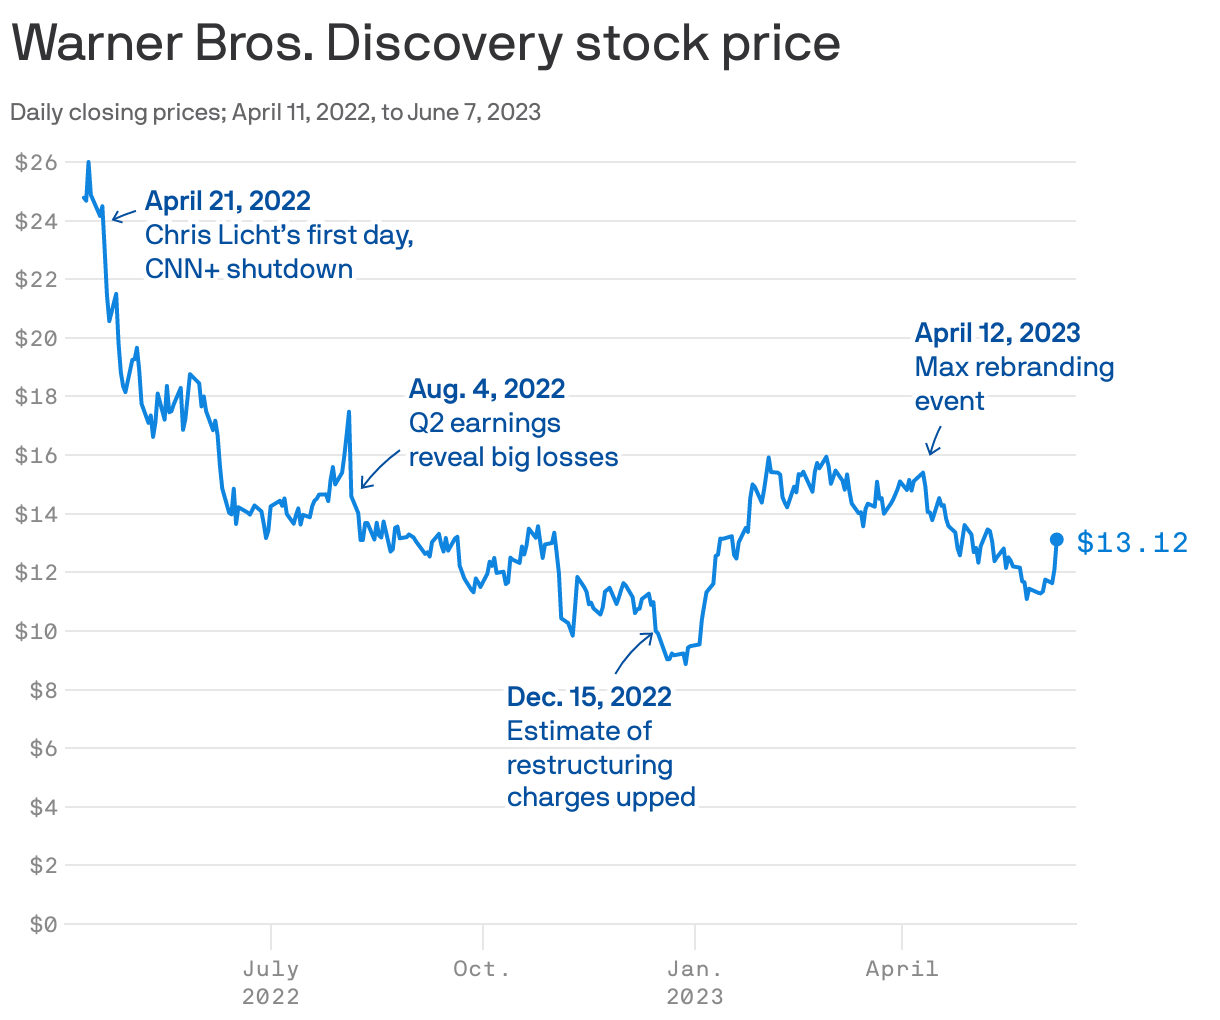 Warner Bros. Discovery stock price